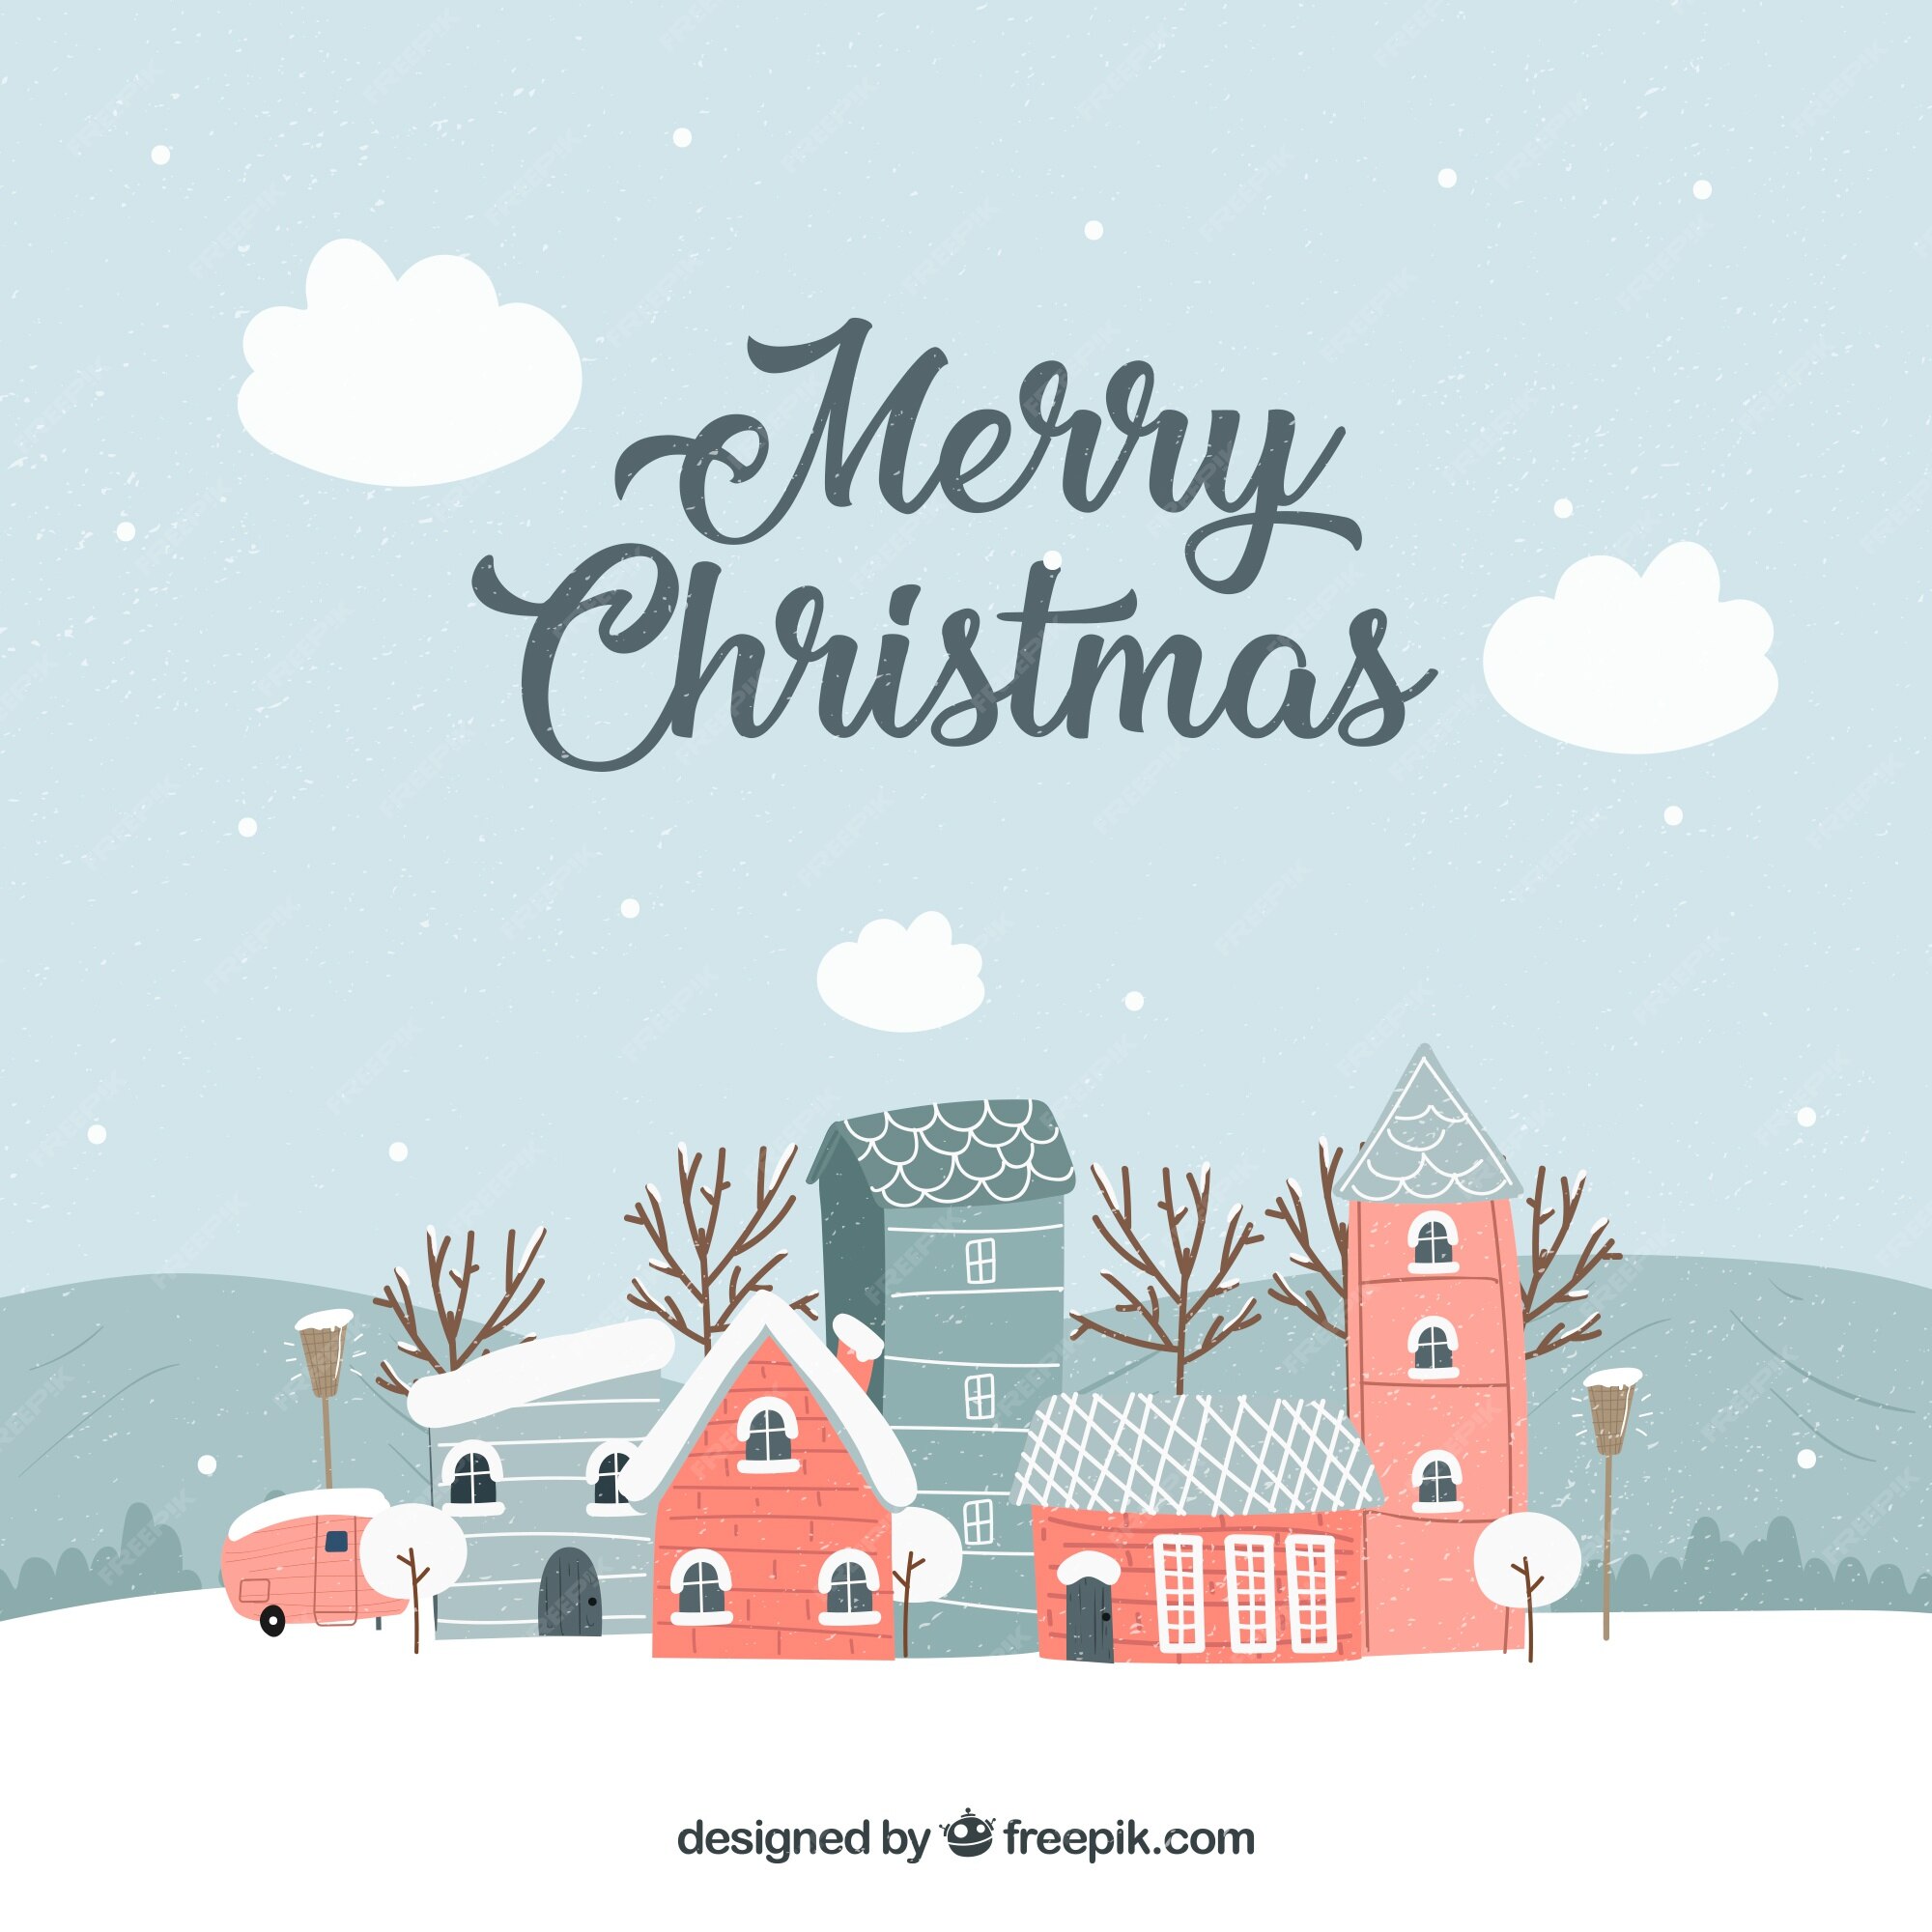 Premium Vector | Vintage christmas town in grey tones with red buildings